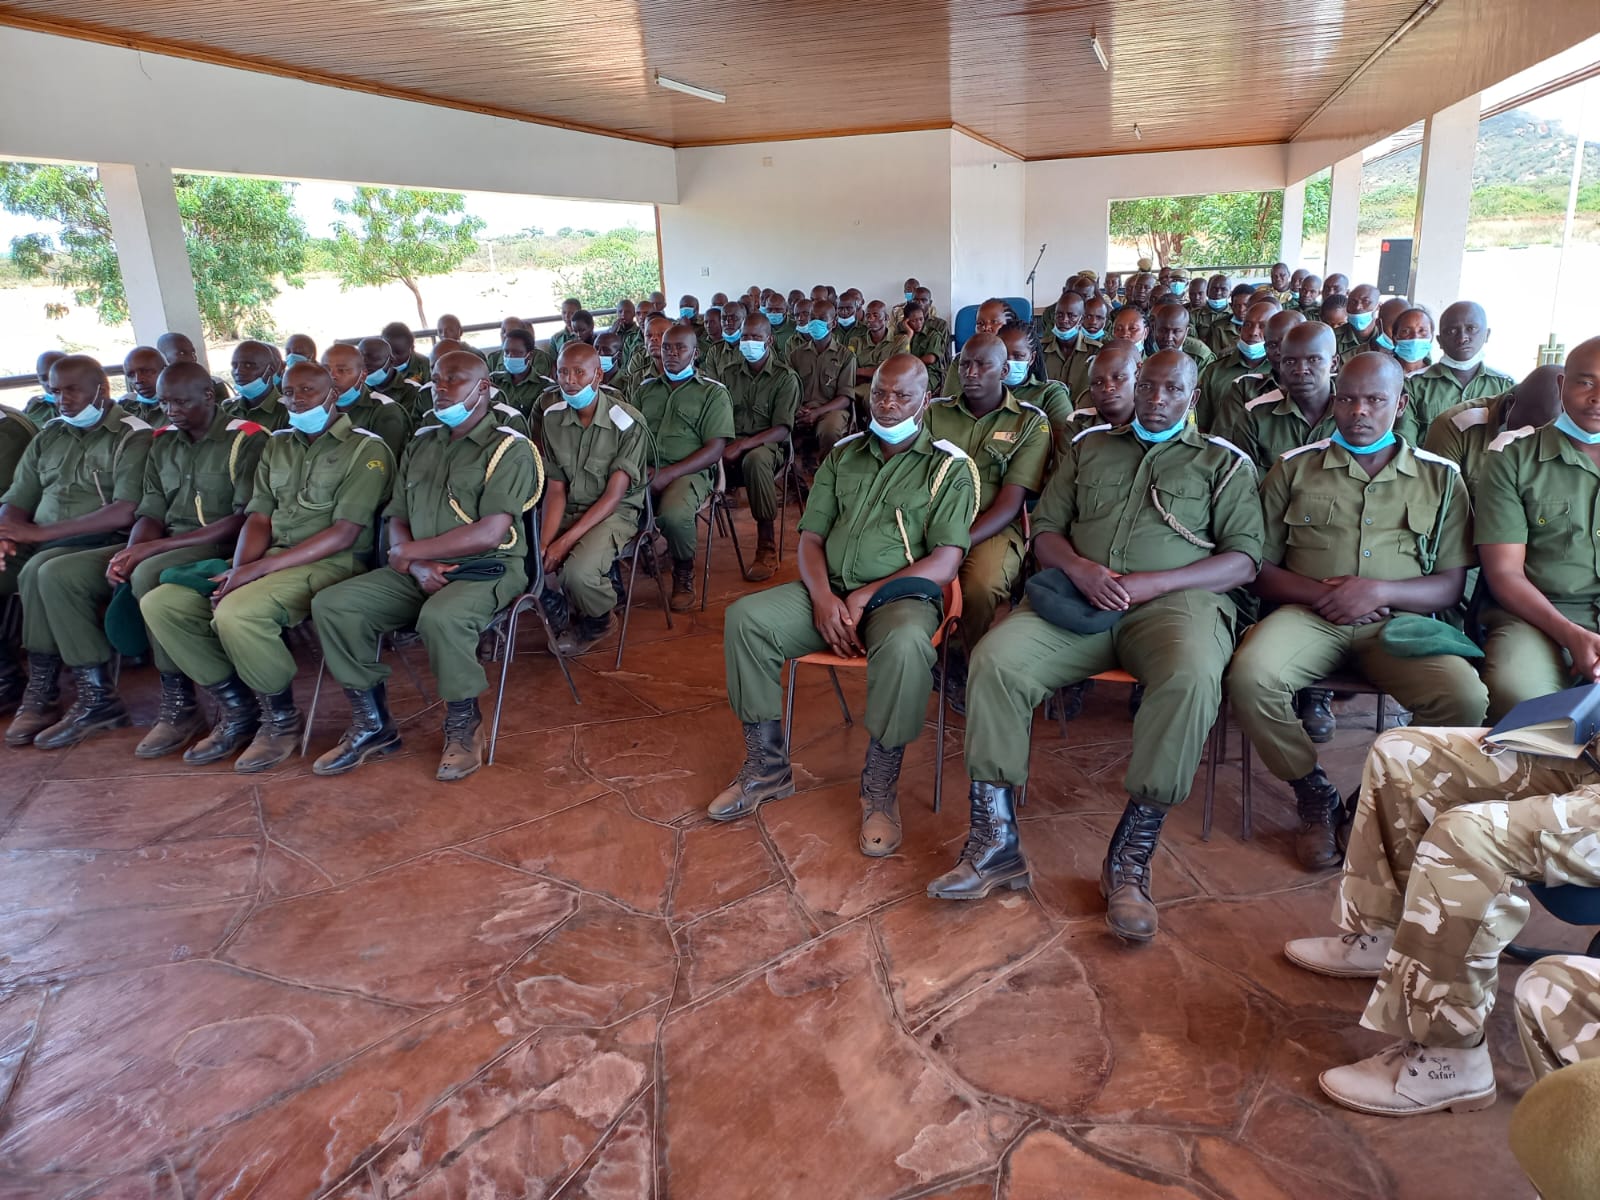 Training of Community rangers at the Tsavo Conservancy ecosystem. The capacity building program is supported by the Combating Poaching and Illegal WildlifeTrafficking UNDP-WT Kenya Project .